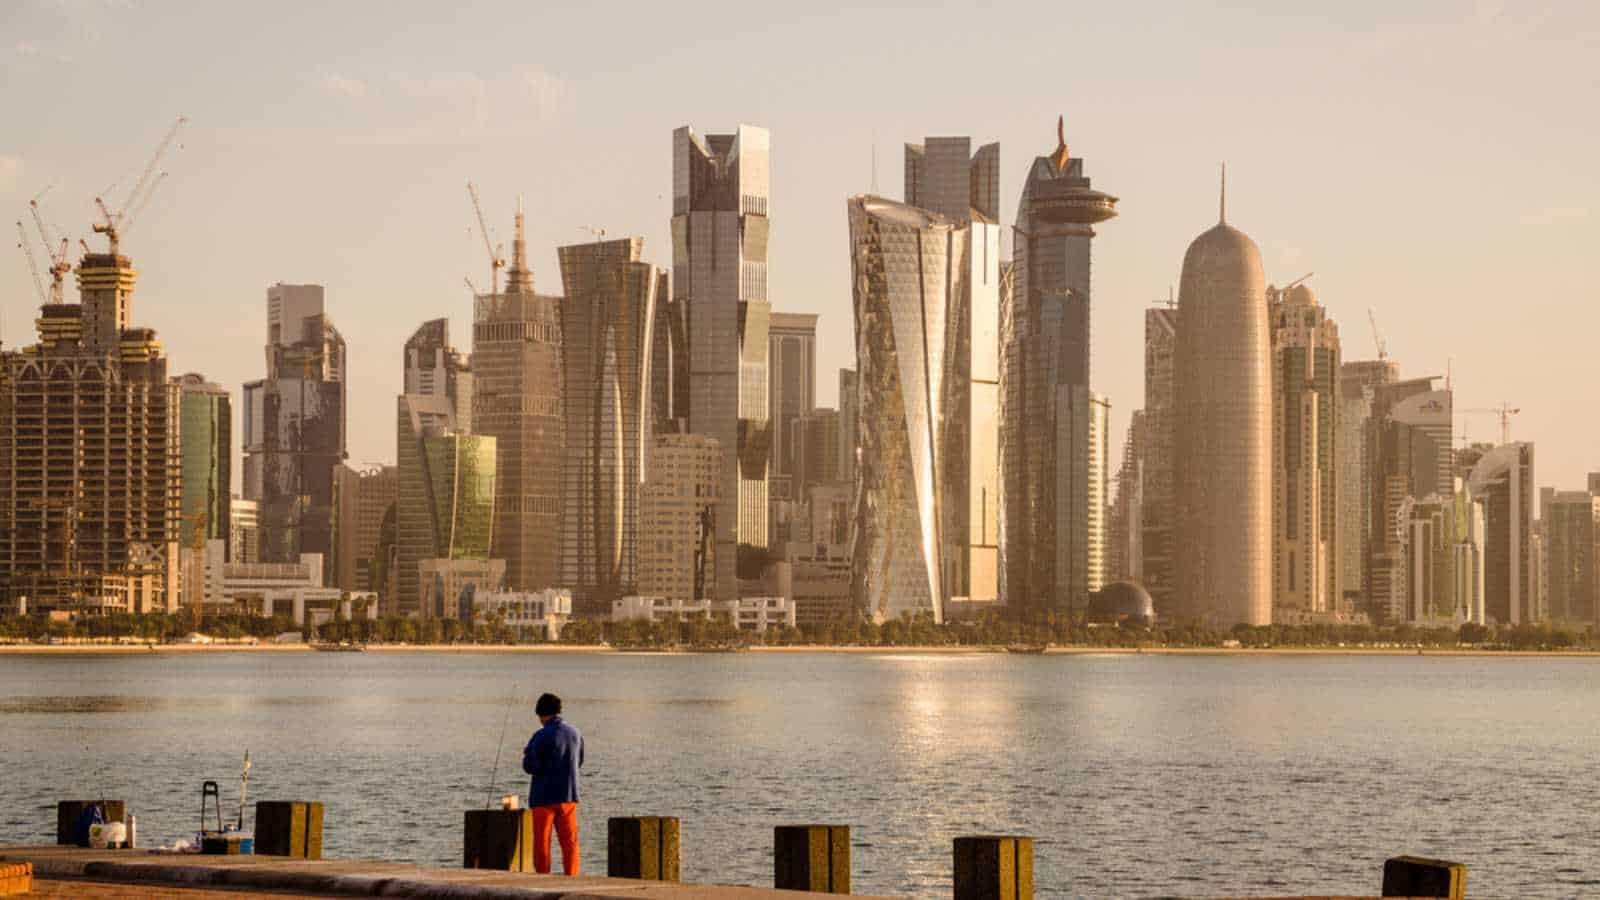 The skyline of the commercial center of Doha, the capital of the Arabian Gulf state Qatar